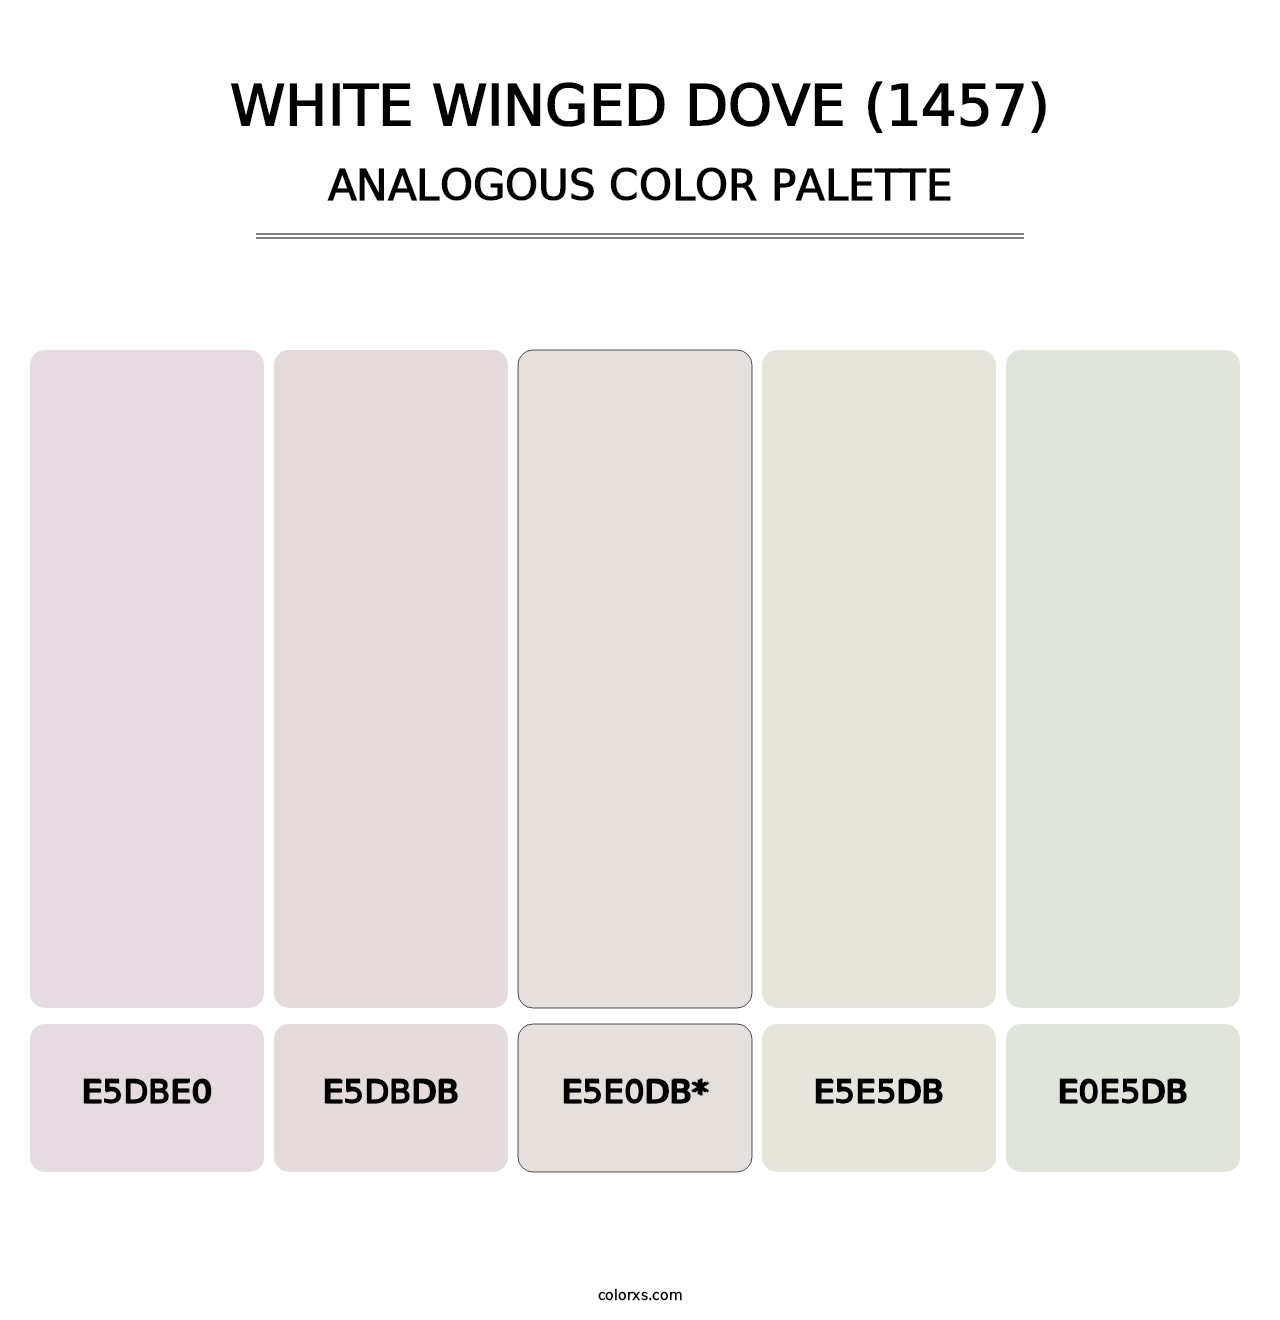 White Winged Dove (1457) - Analogous Color Palette